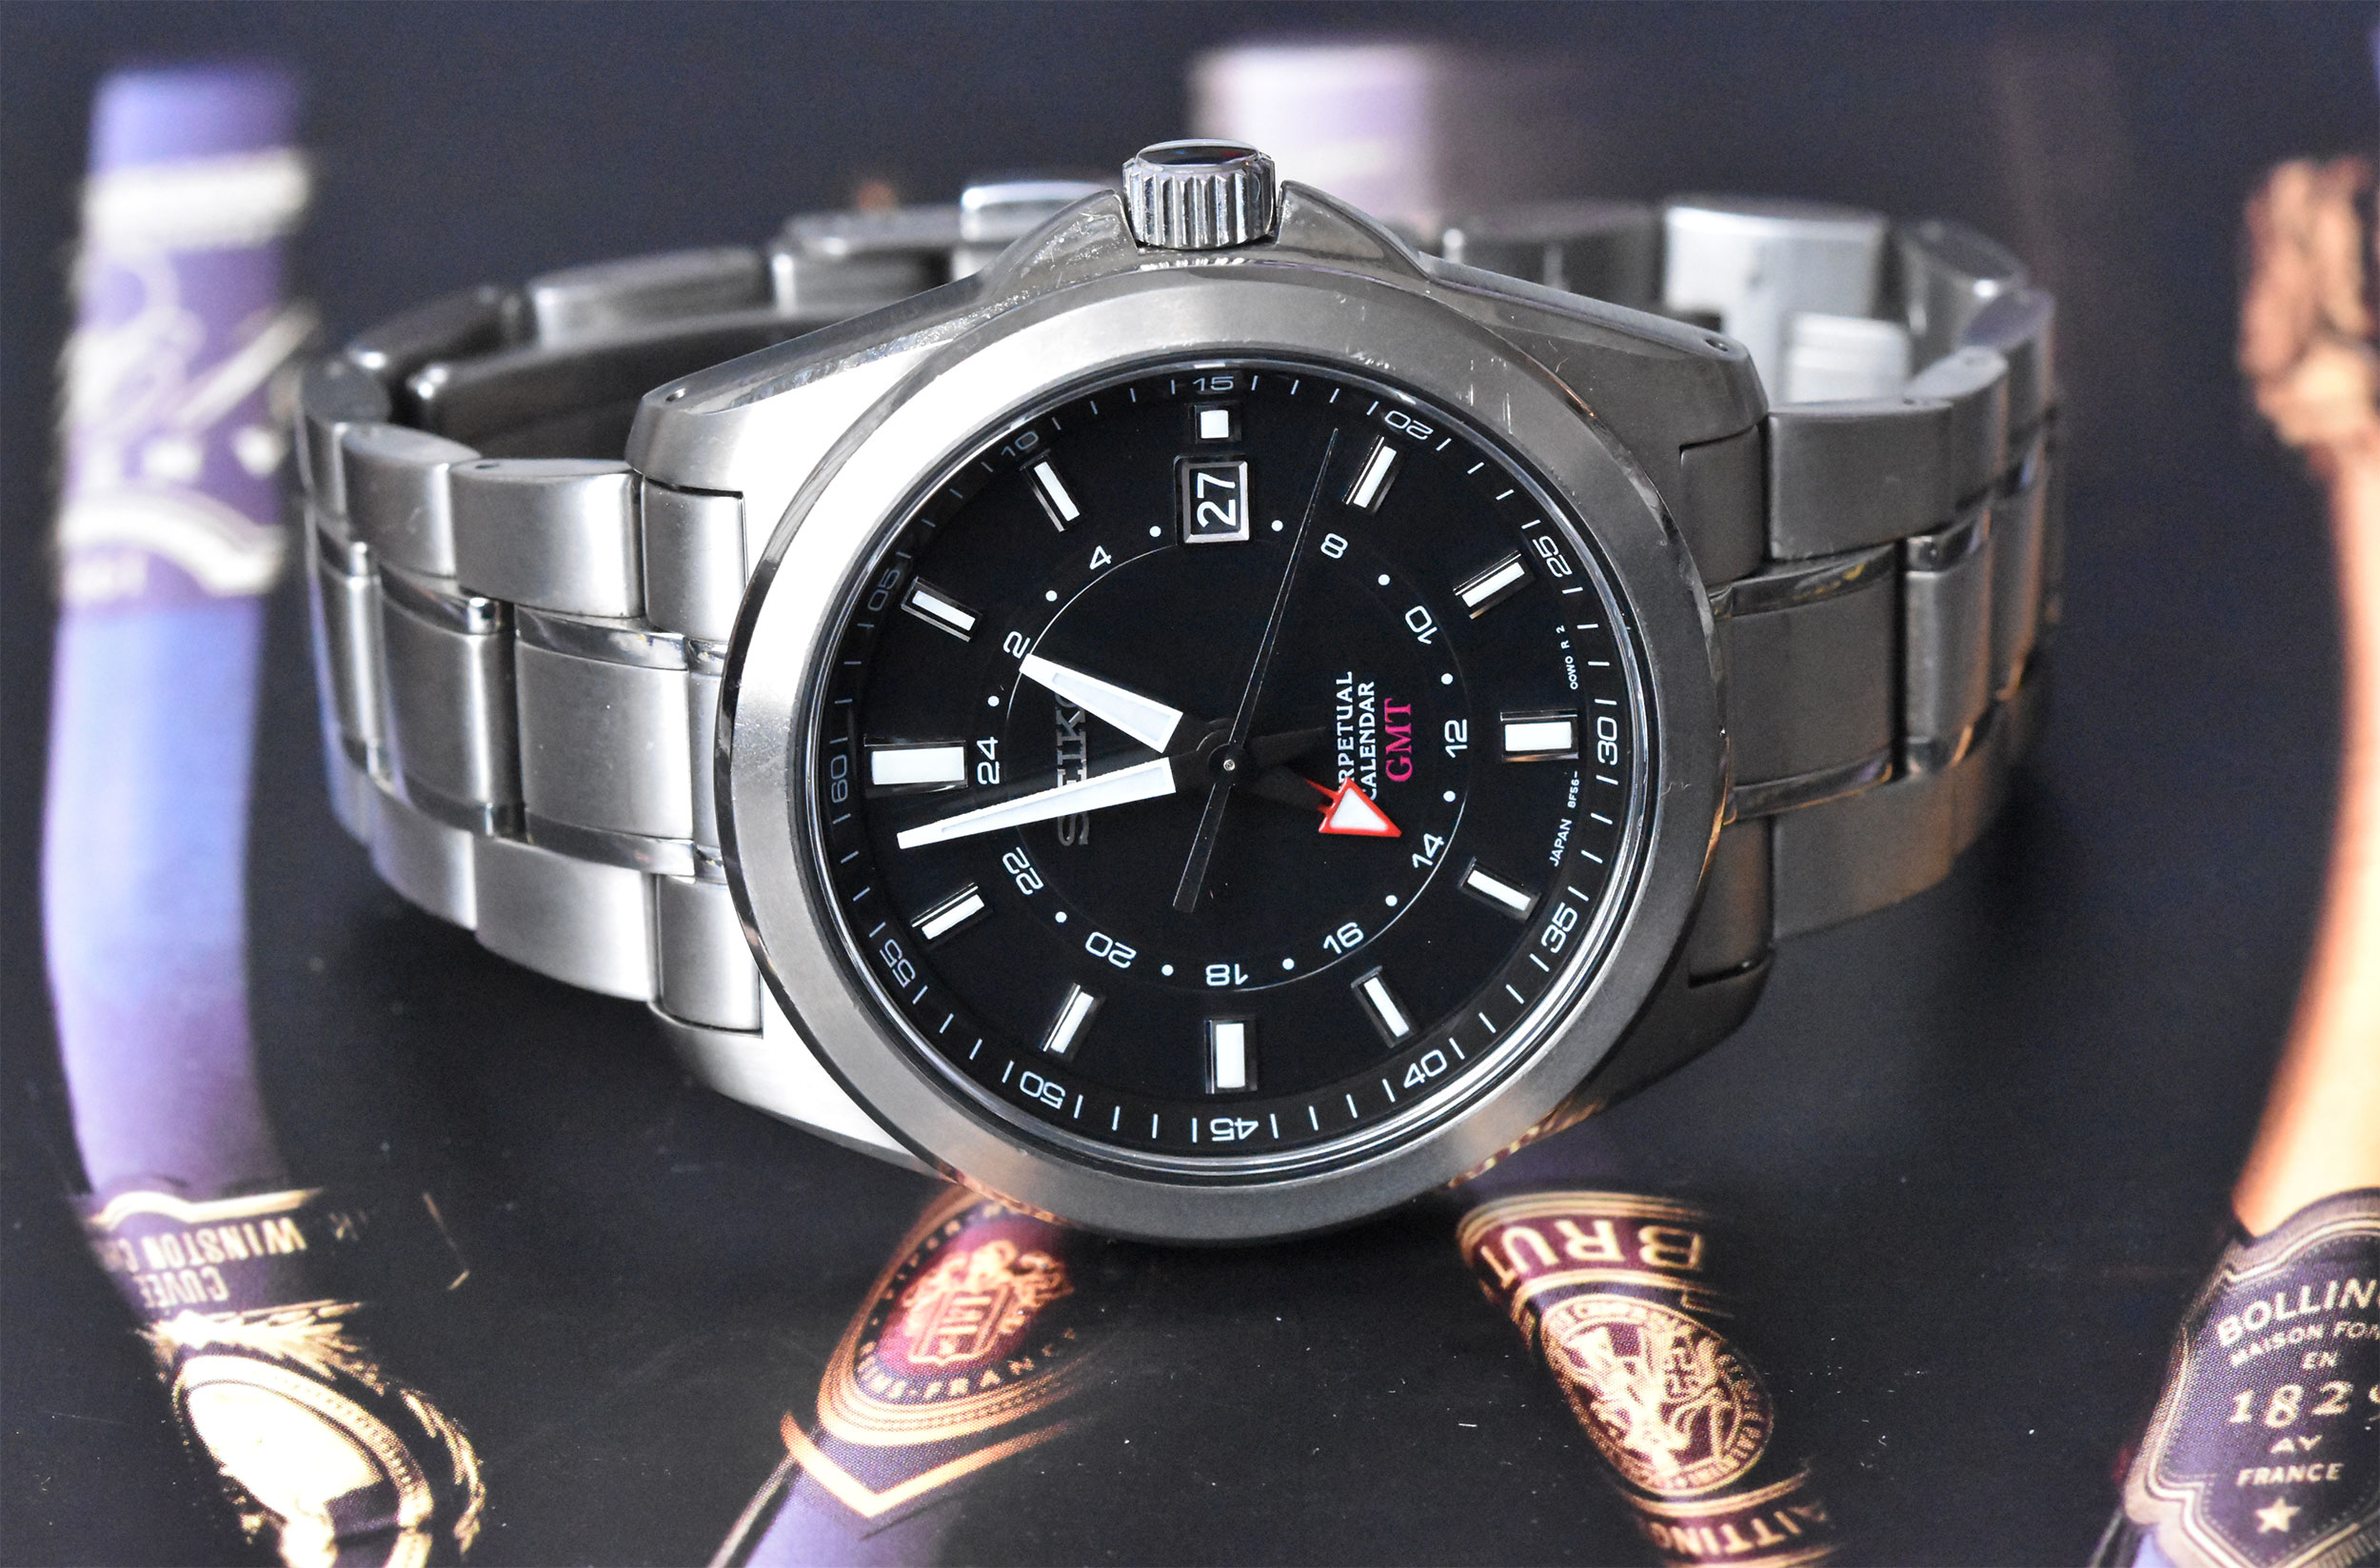 Owner Review: Seiko SBQJ015 – Quartz Watch Packed with Features